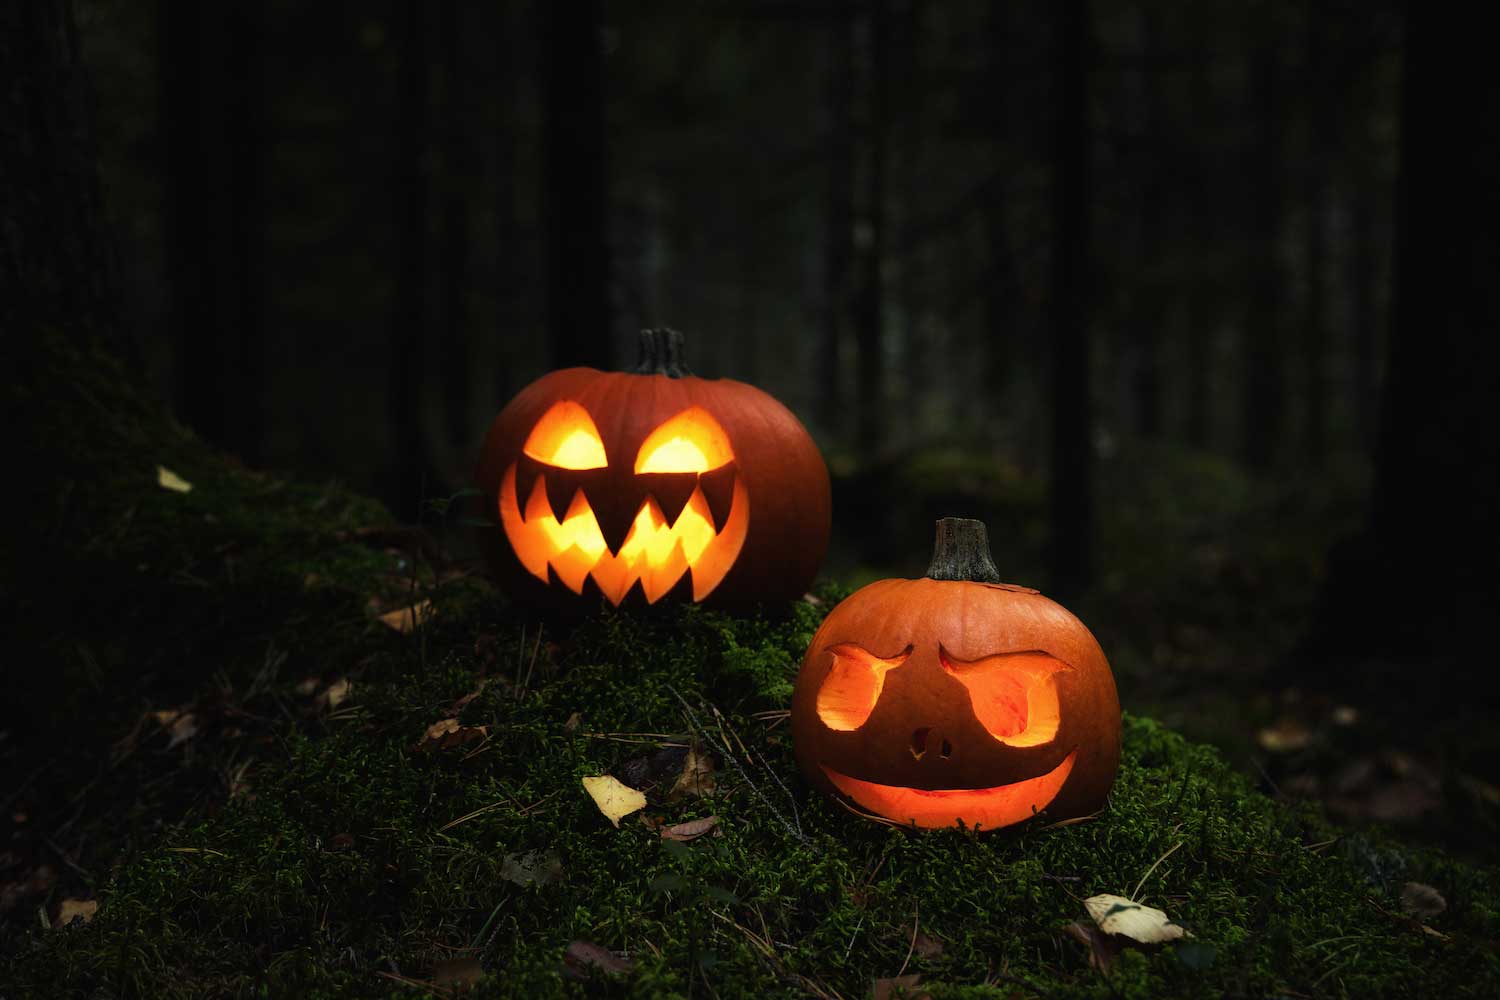 Lighted jack-o'-lanterns on a mossy log in the forest.